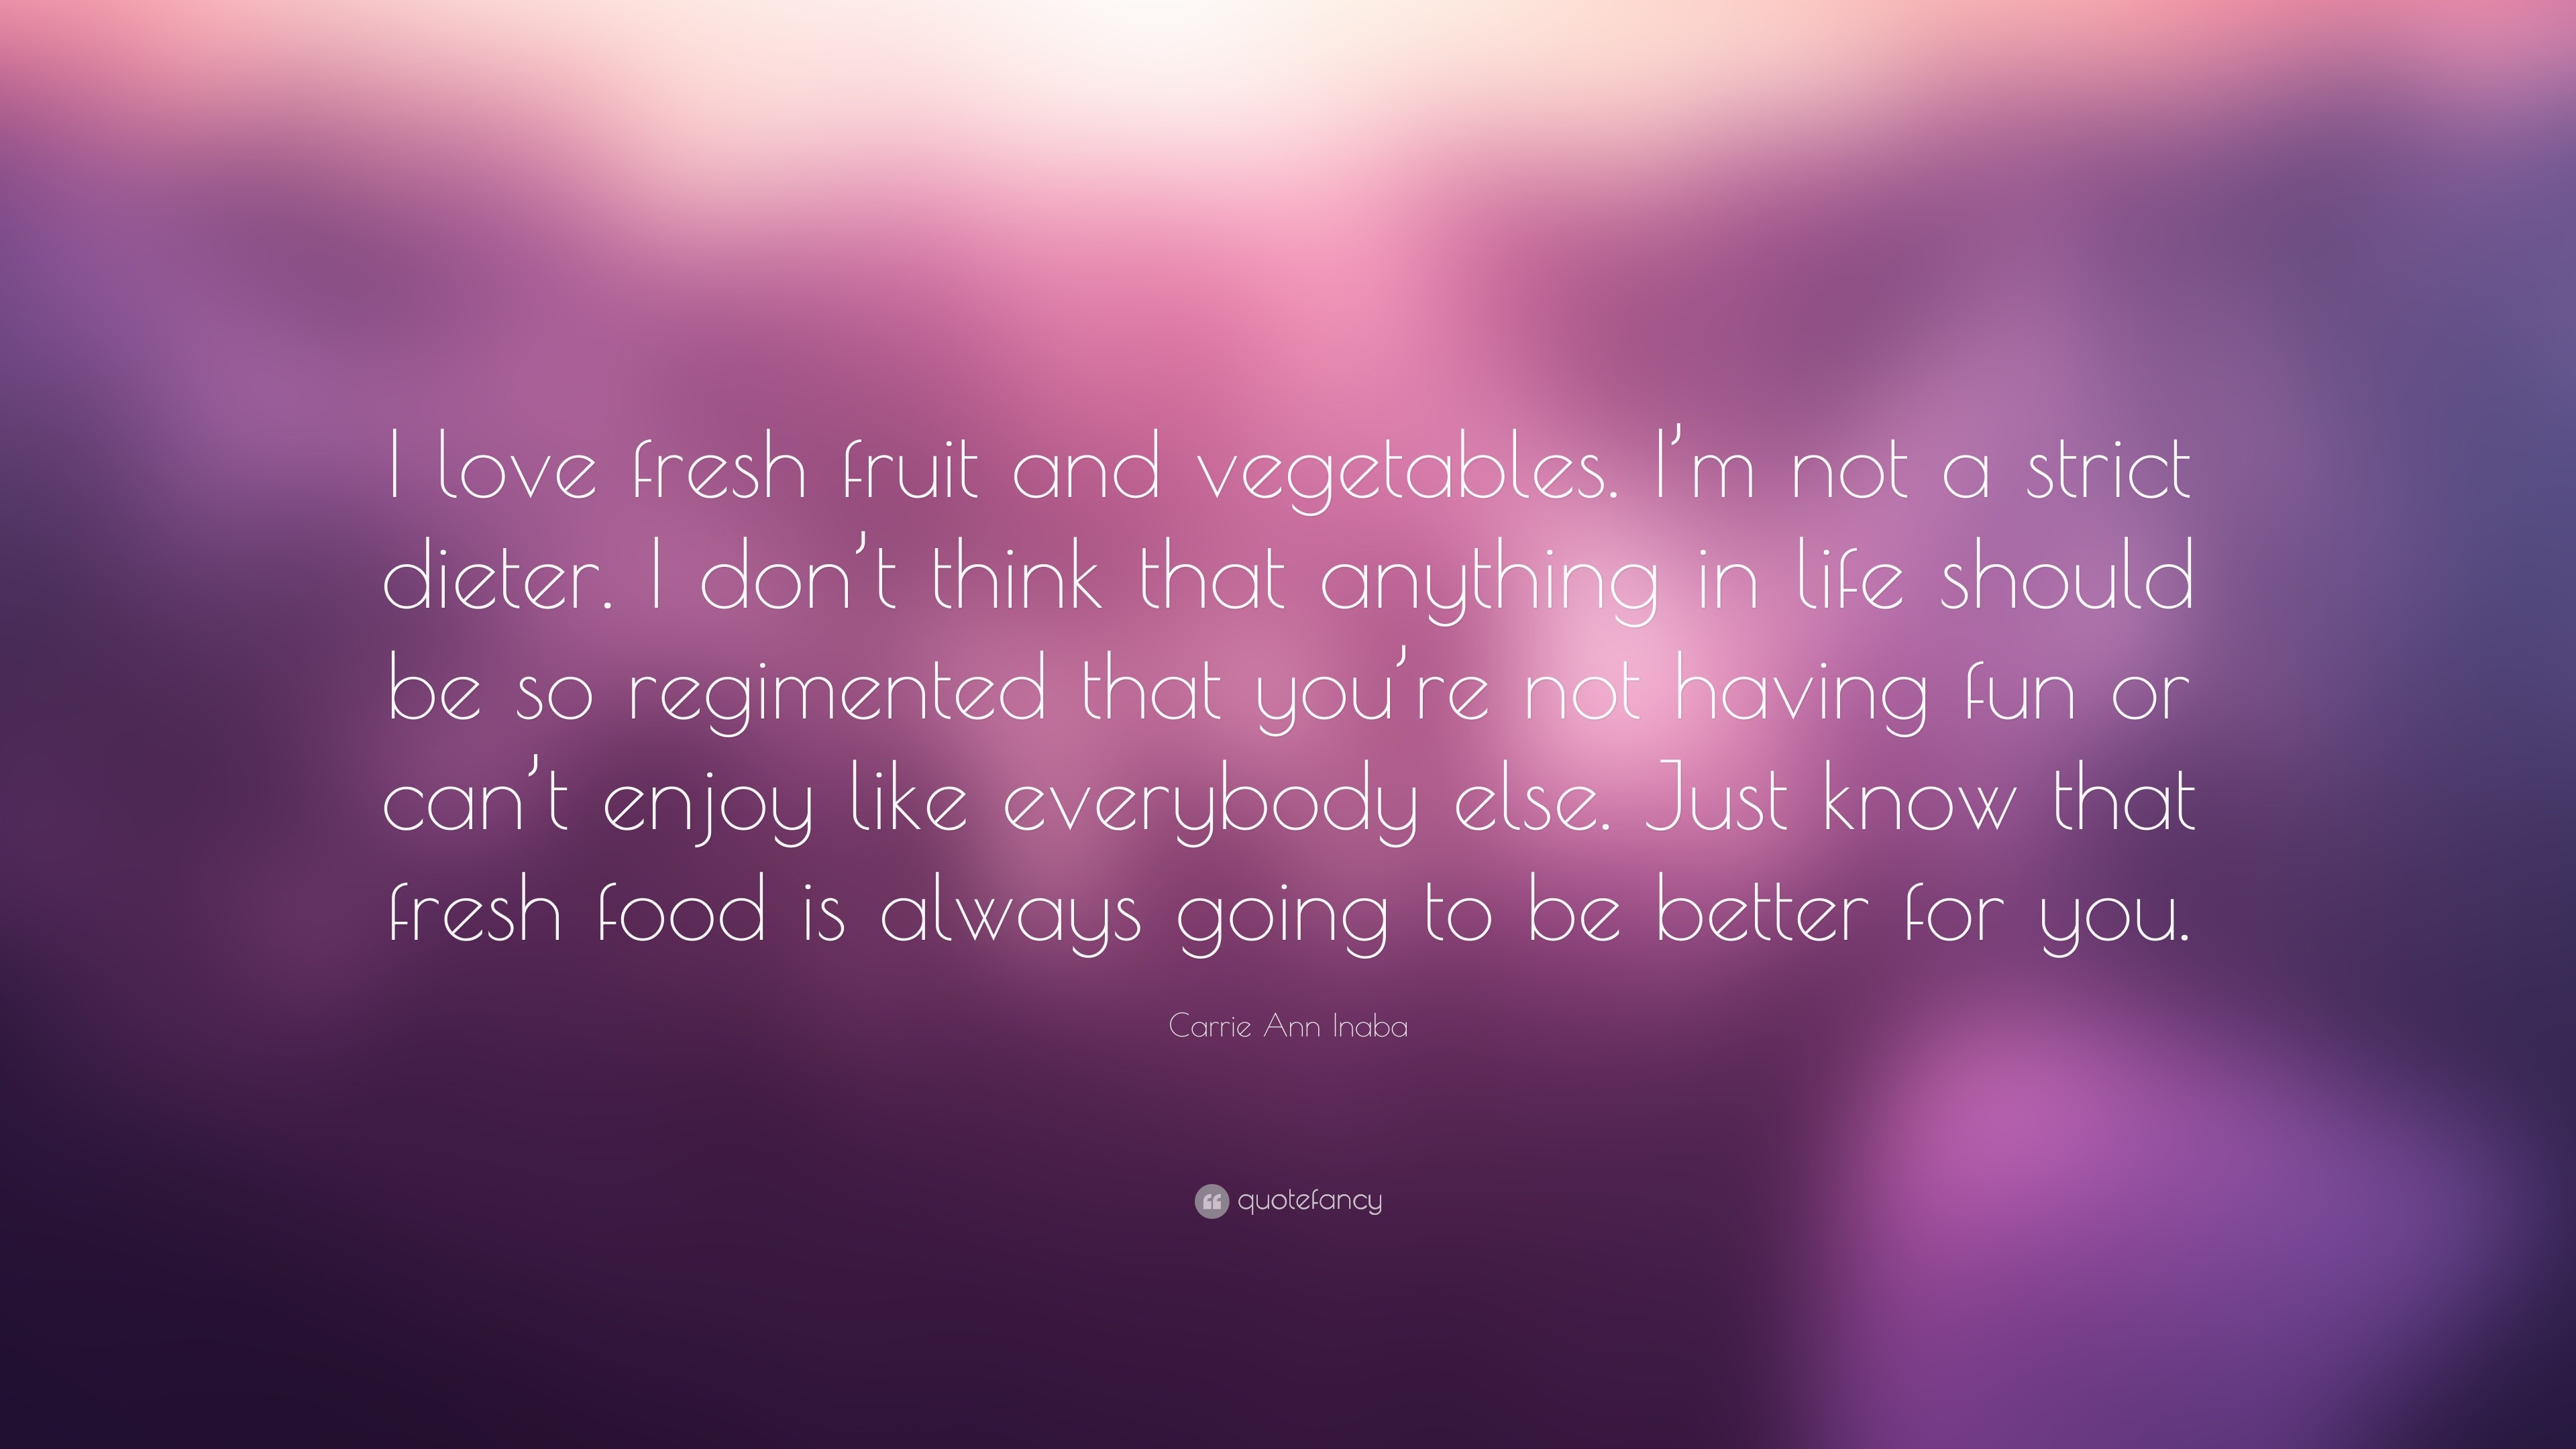 Carrie Ann Inaba Quote “I love fresh fruit and ve ables I m